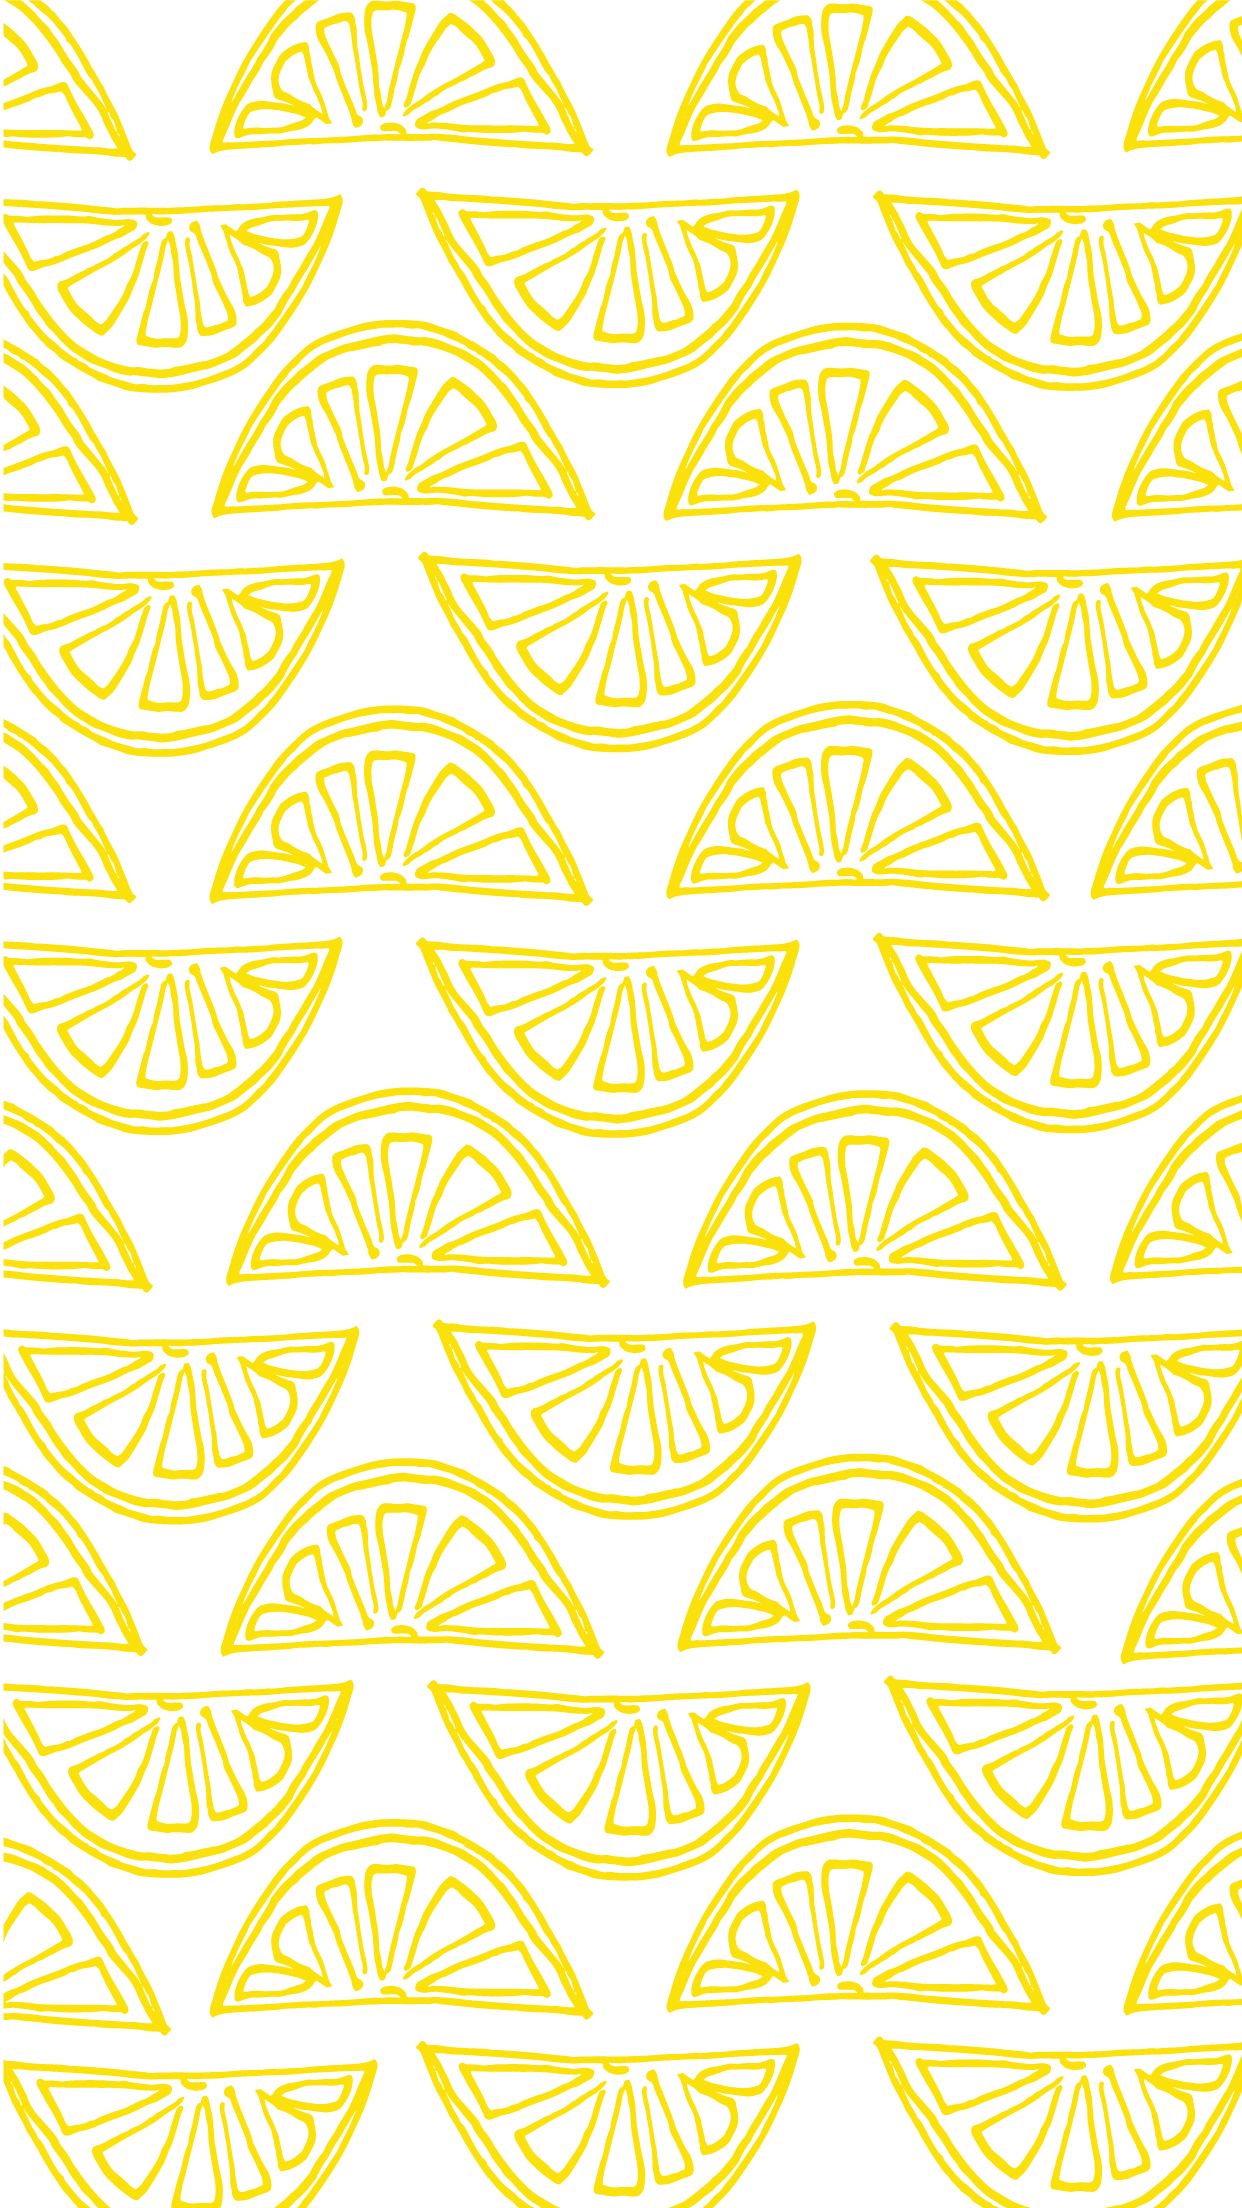 A yellow pattern of slices on white - Lemon